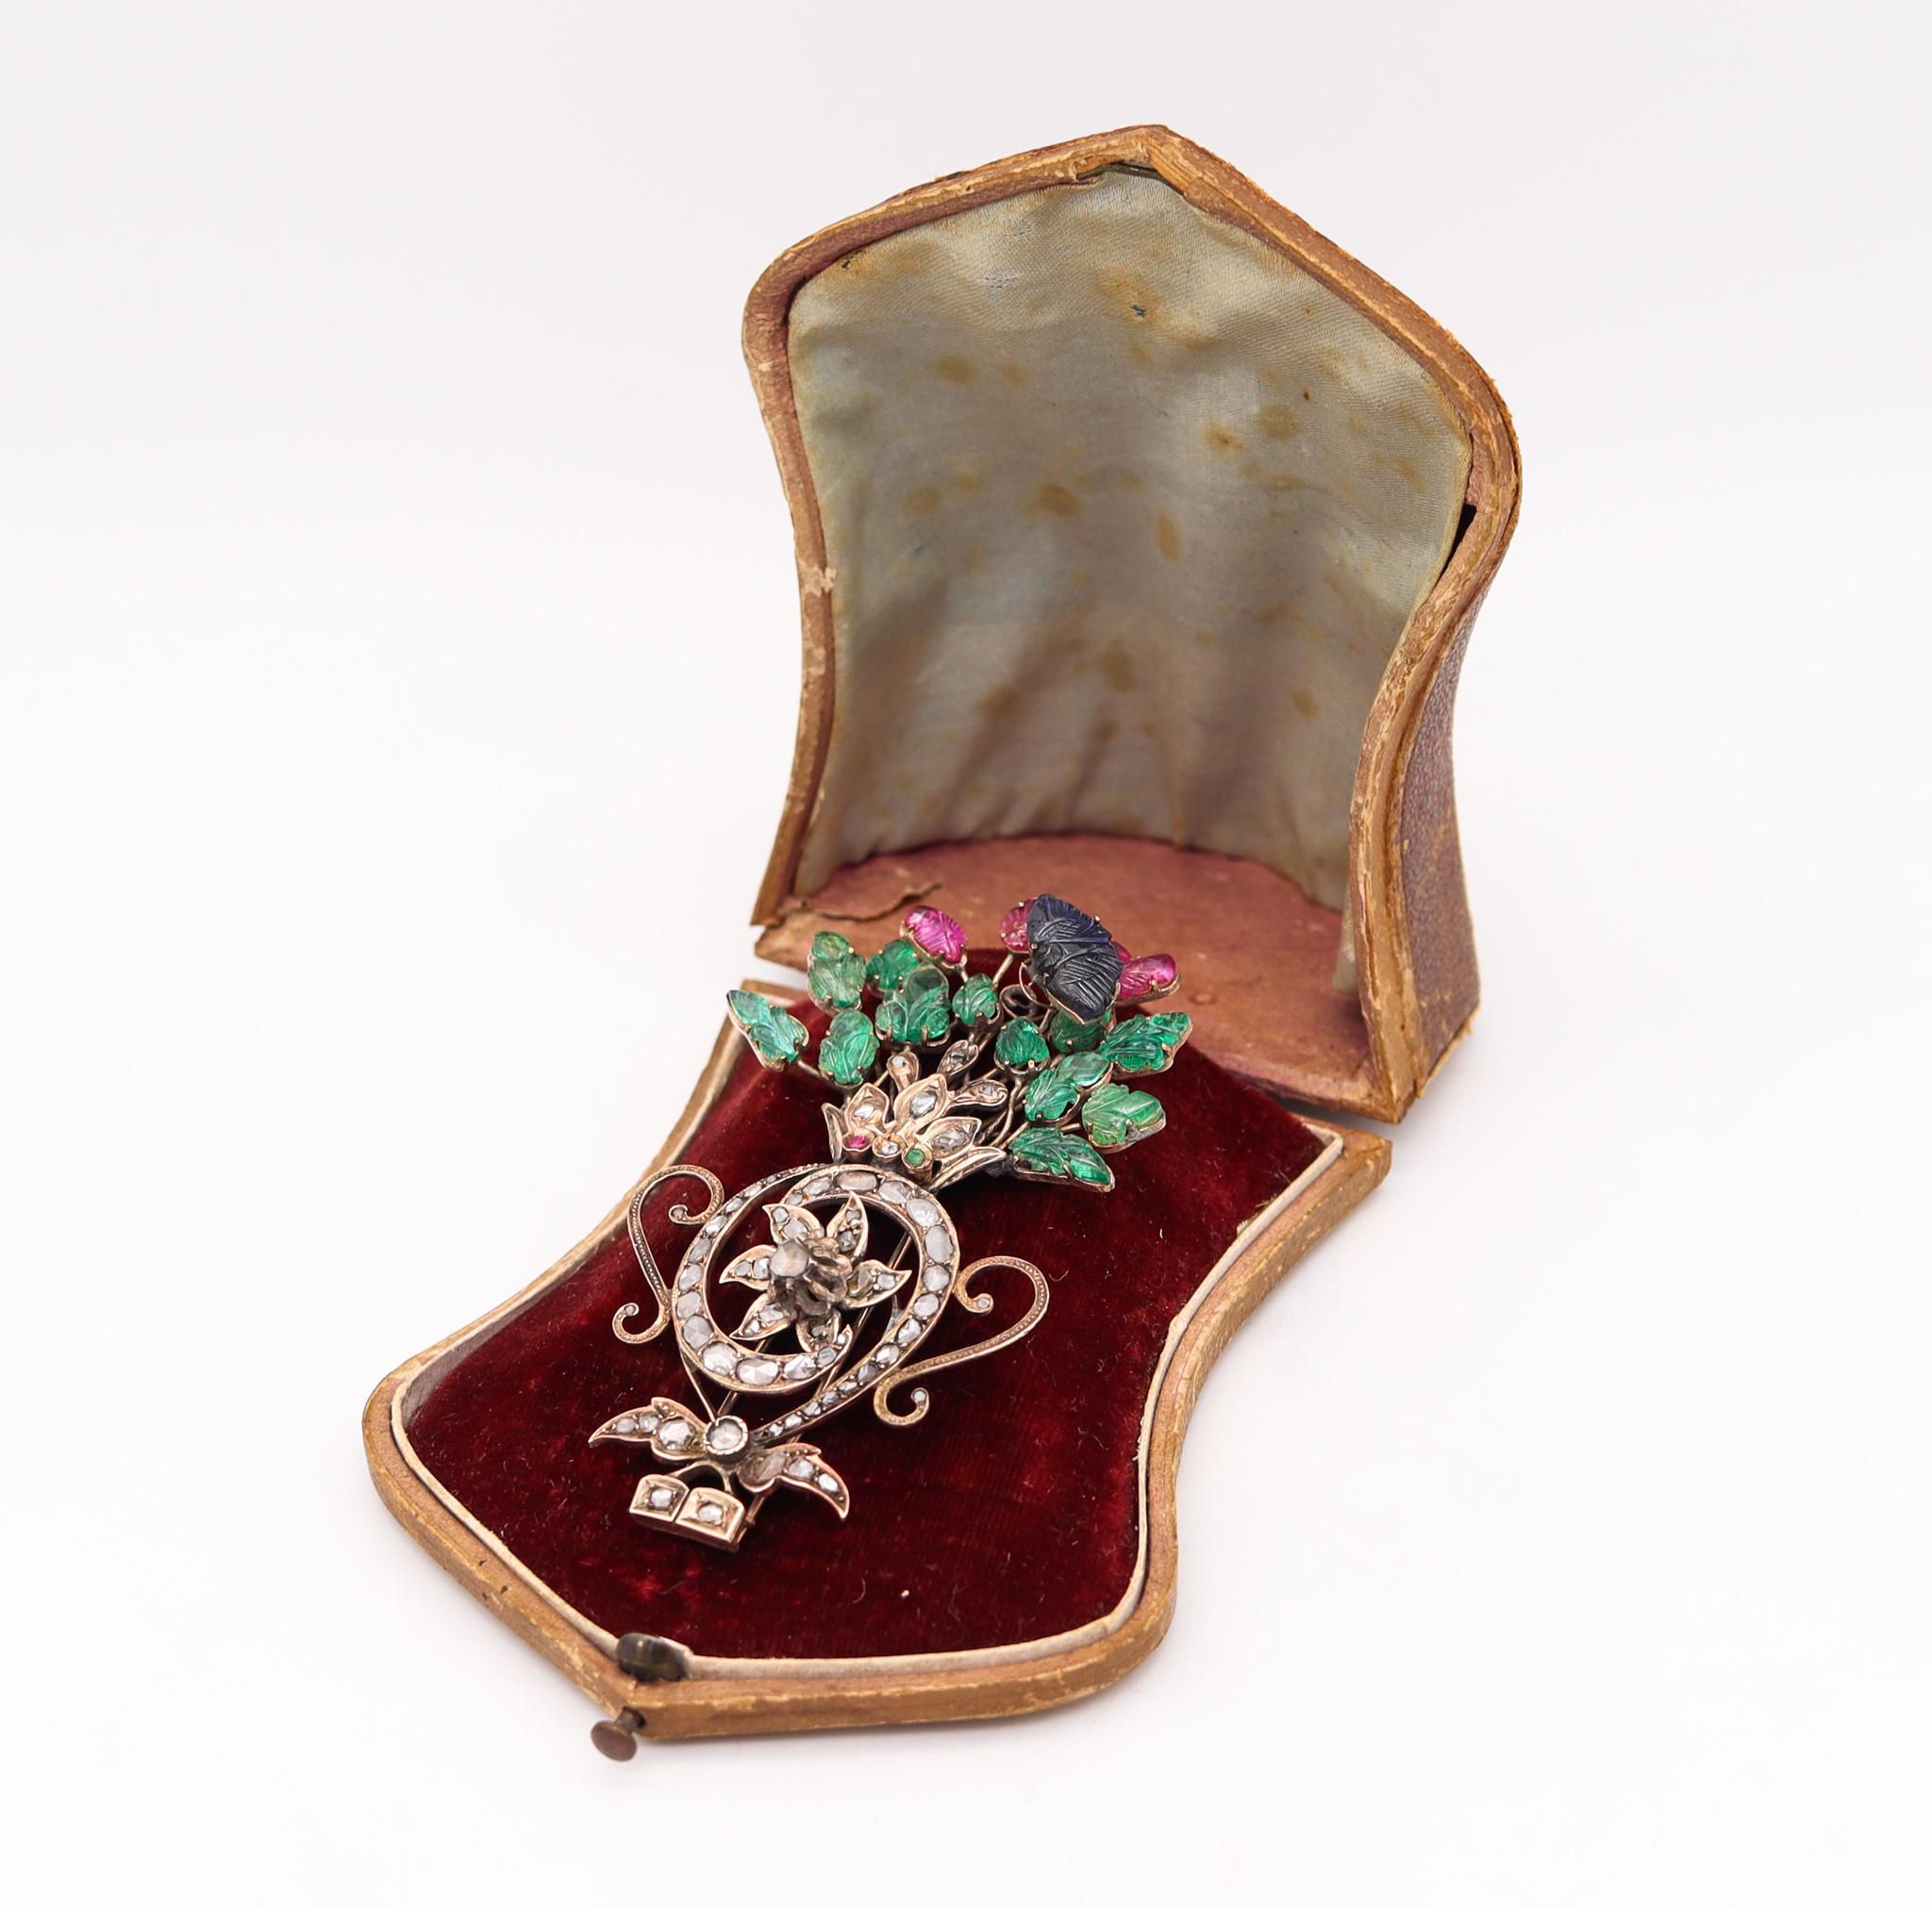 Mughal tutti frutti jardiniere brooch with carved gemstones.

A beautiful colorful piece, created by the Mughals courts during the early Victorian era, circa 1830 or earlier. This unusual historical rare piece has been crafted in the shape of a